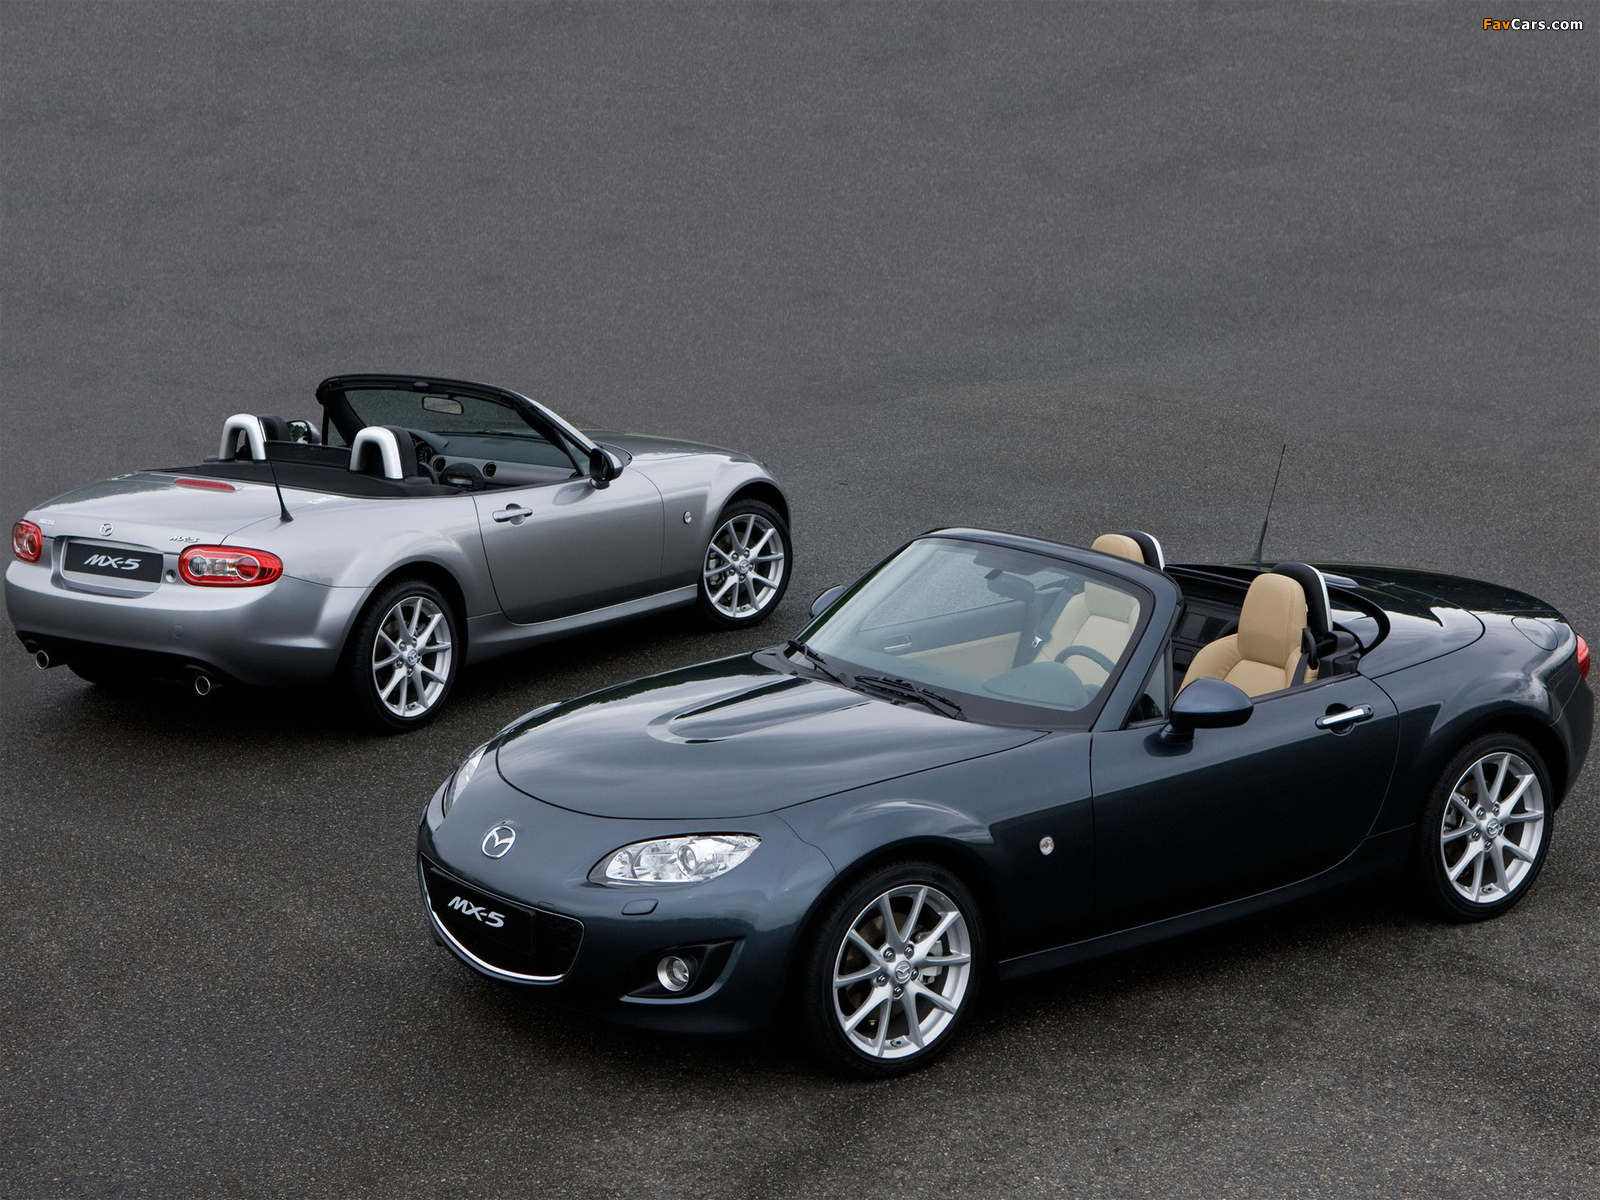 Mazda MX-5 Roadster & MX-5 Roadster-Coupe 2008 pictures (1600 x 1200)